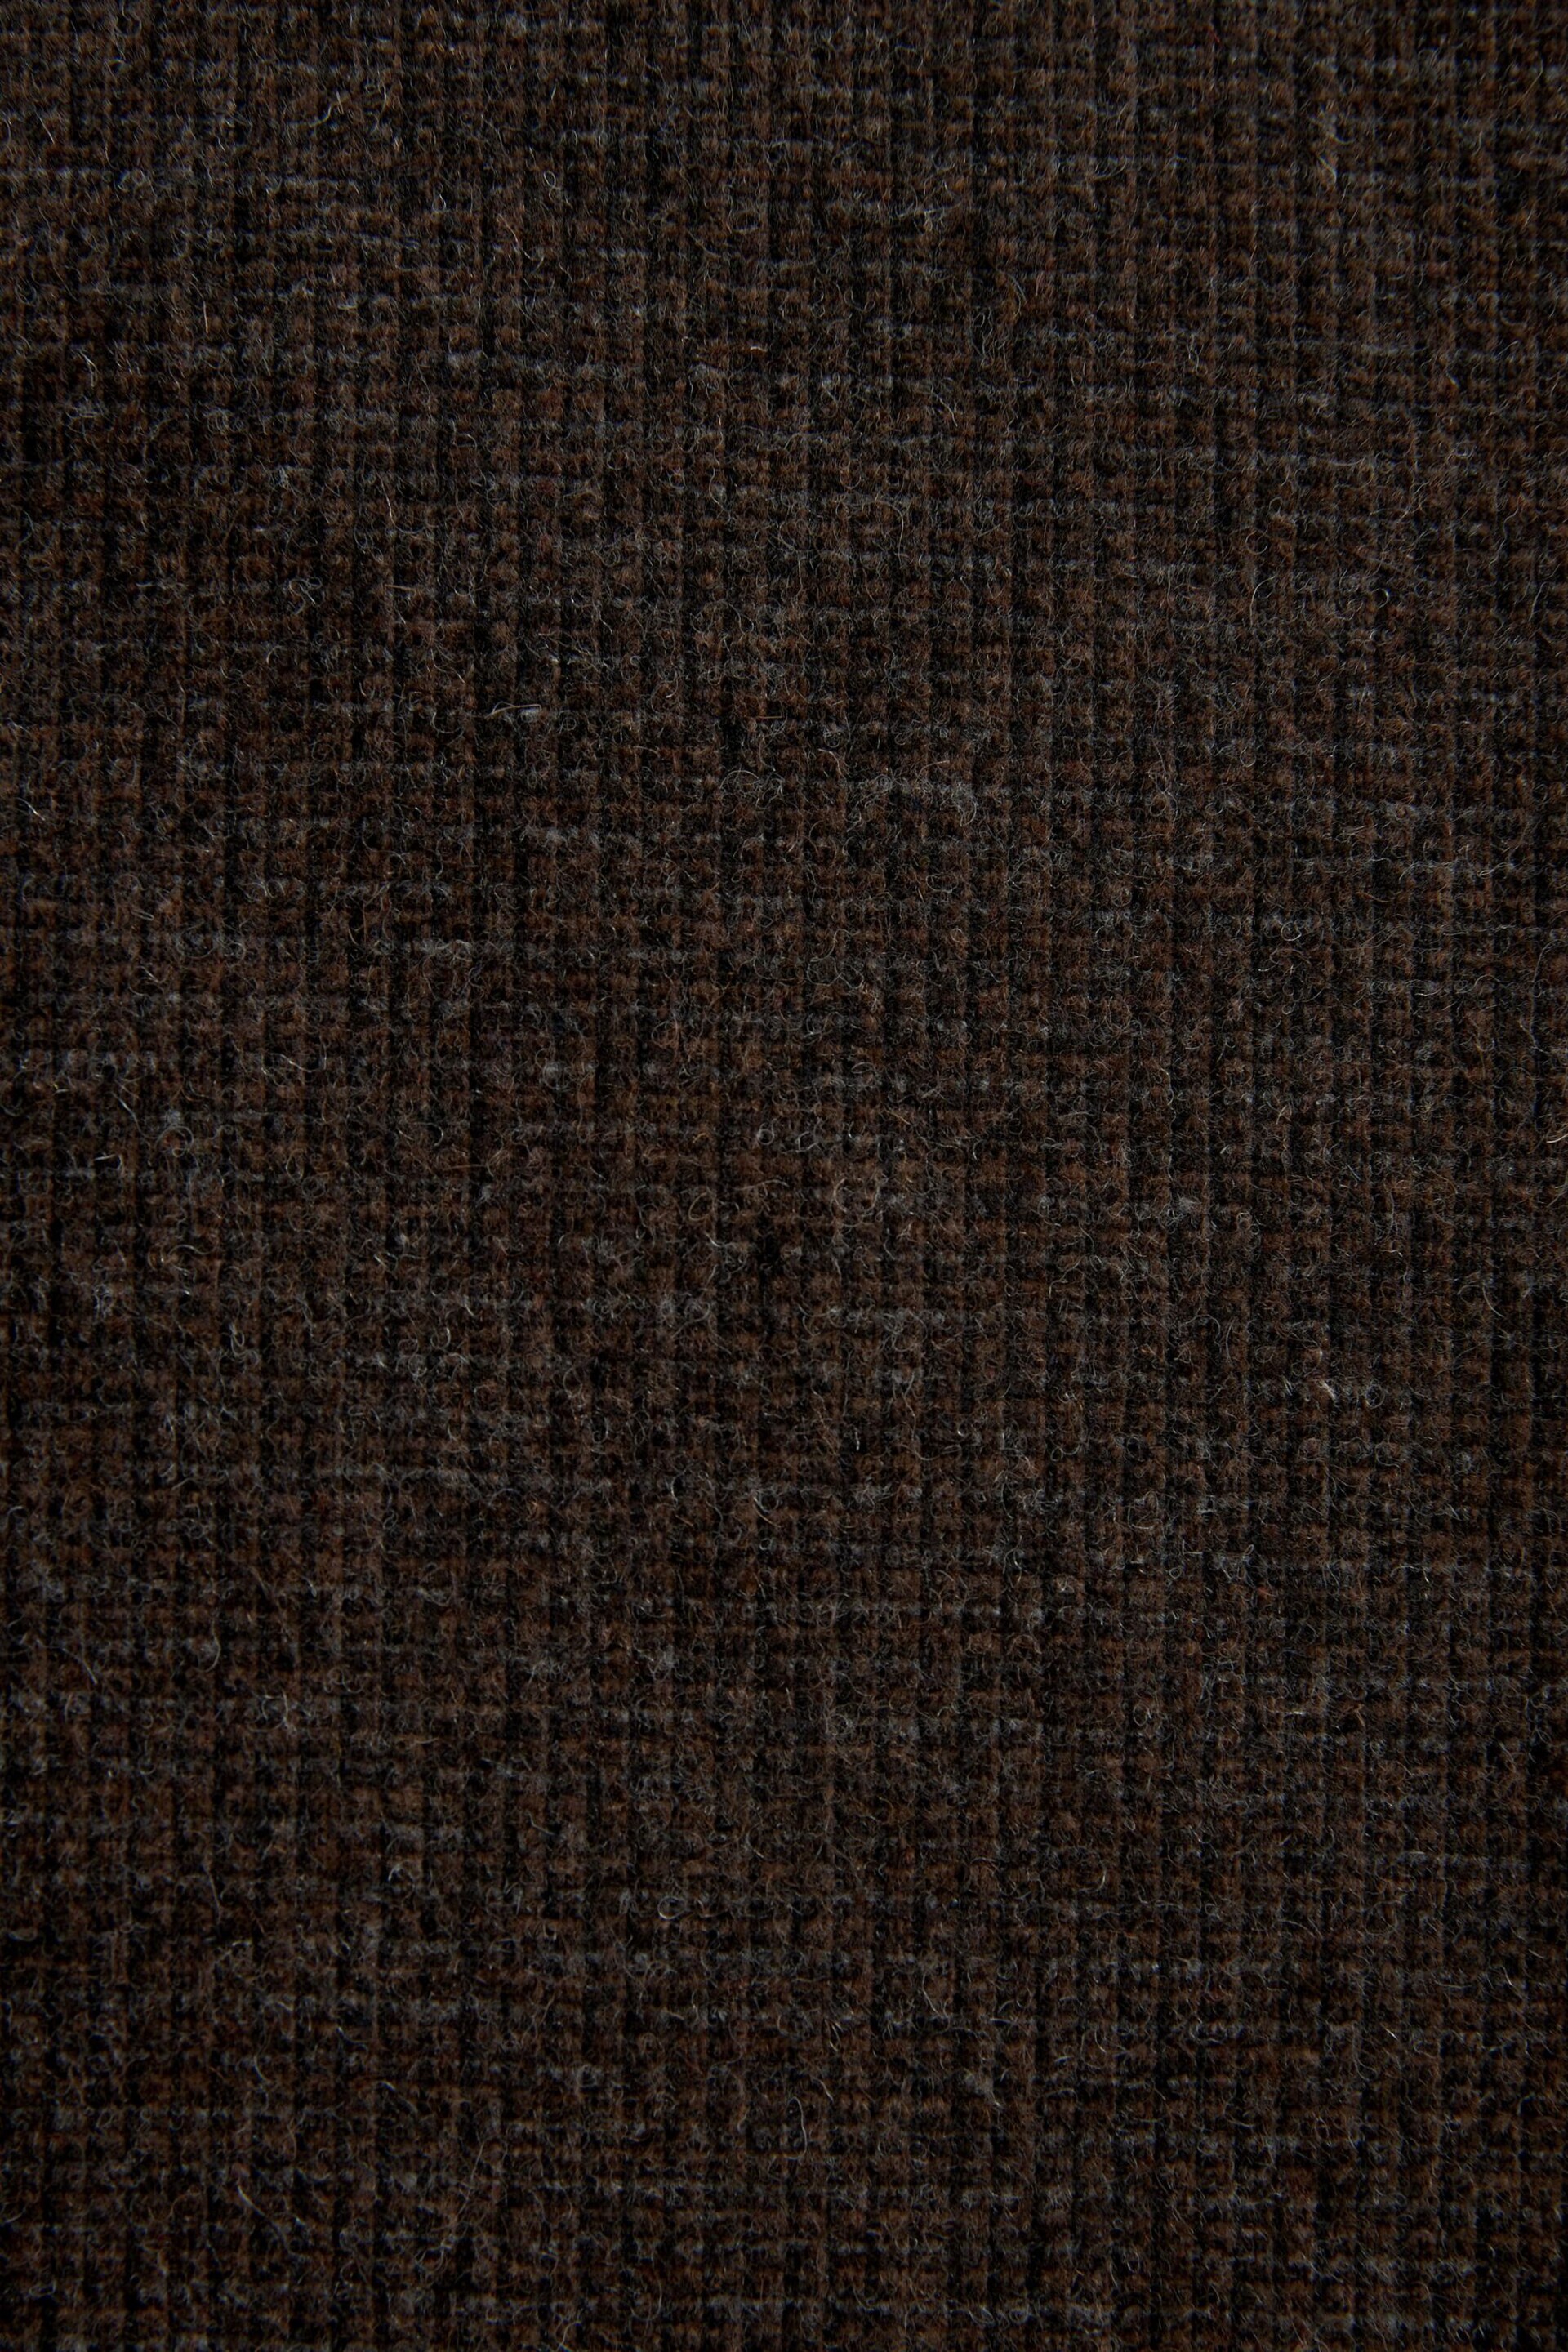 Textured Brown Nova Fides Italian Fabric Trousers With Wool - Image 8 of 8